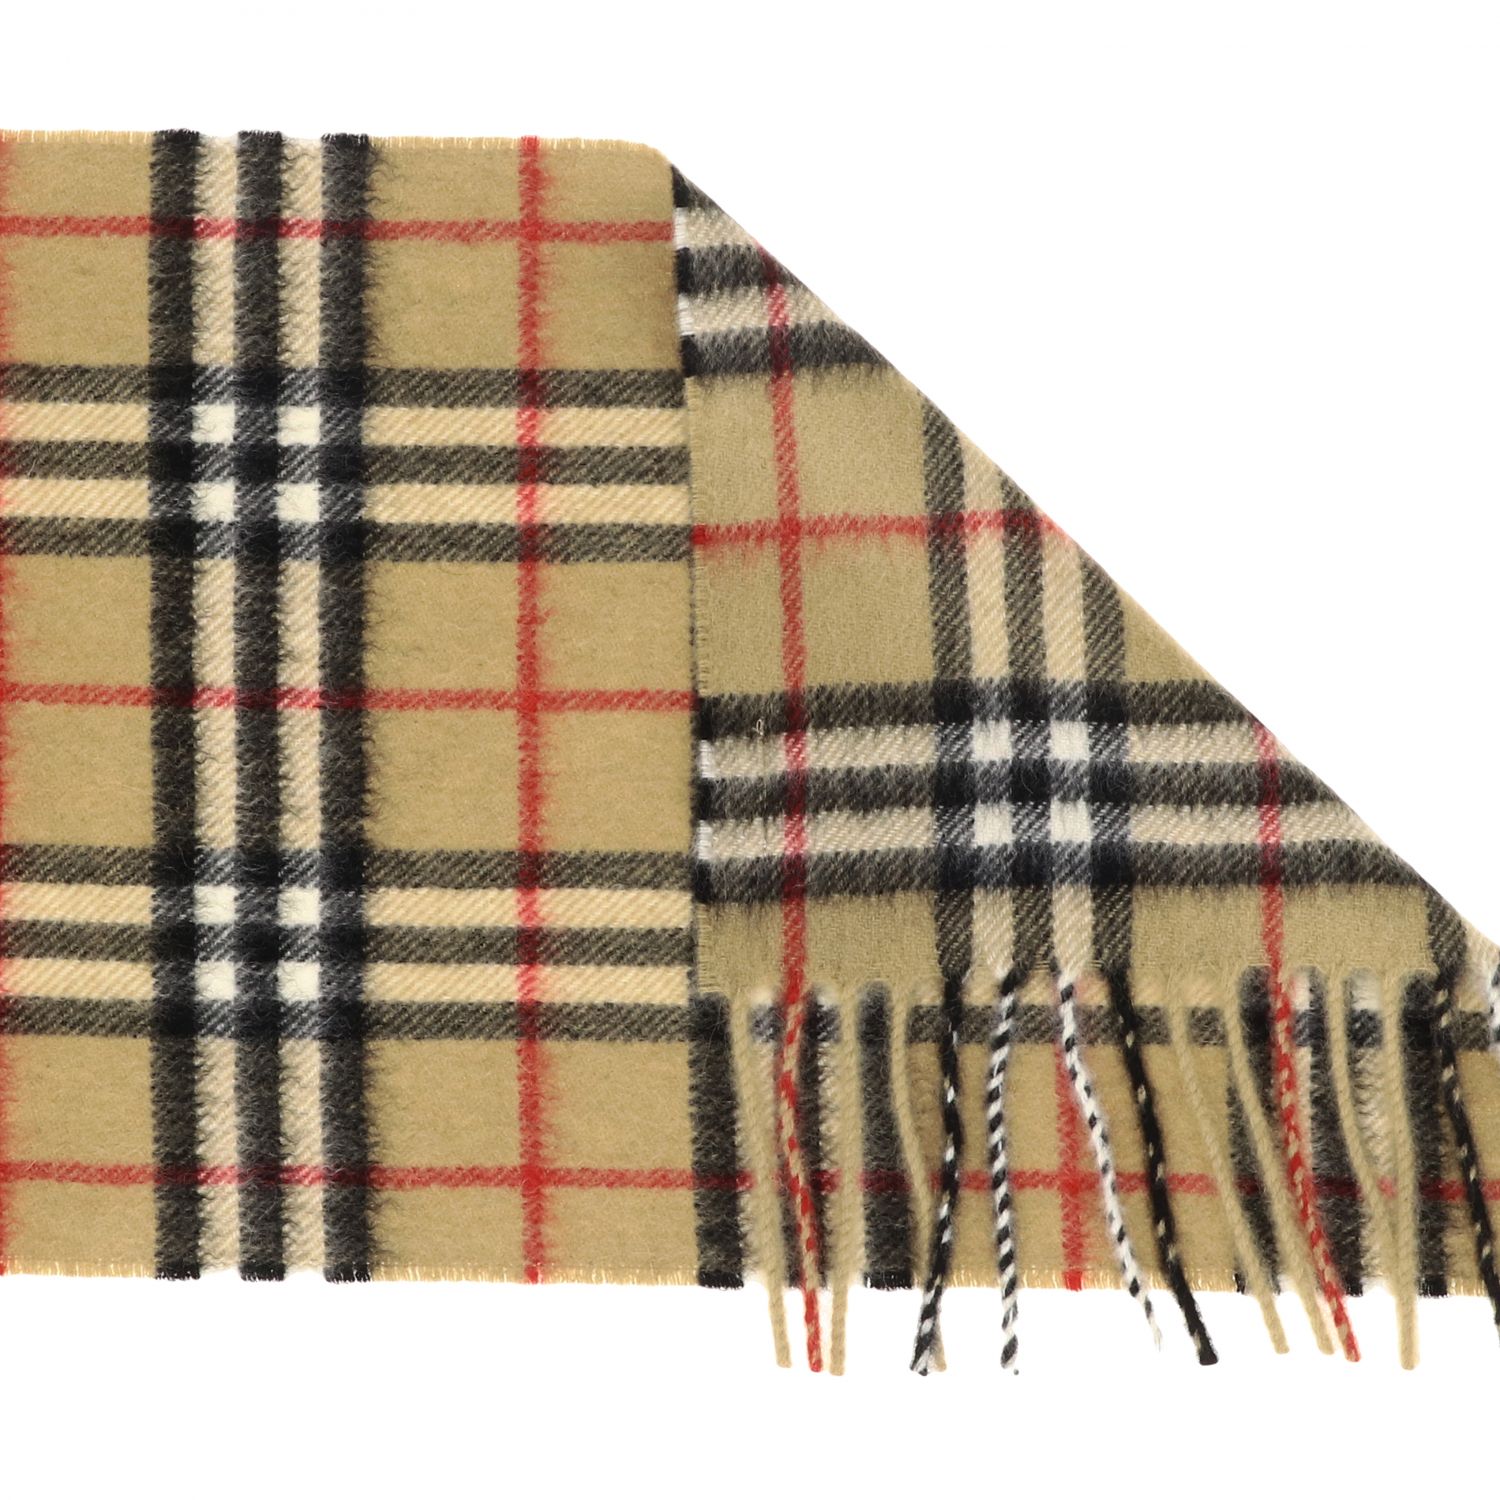 Burberry Outlet: scarf for kids - Beige | Burberry scarf 8015162 111197 ...